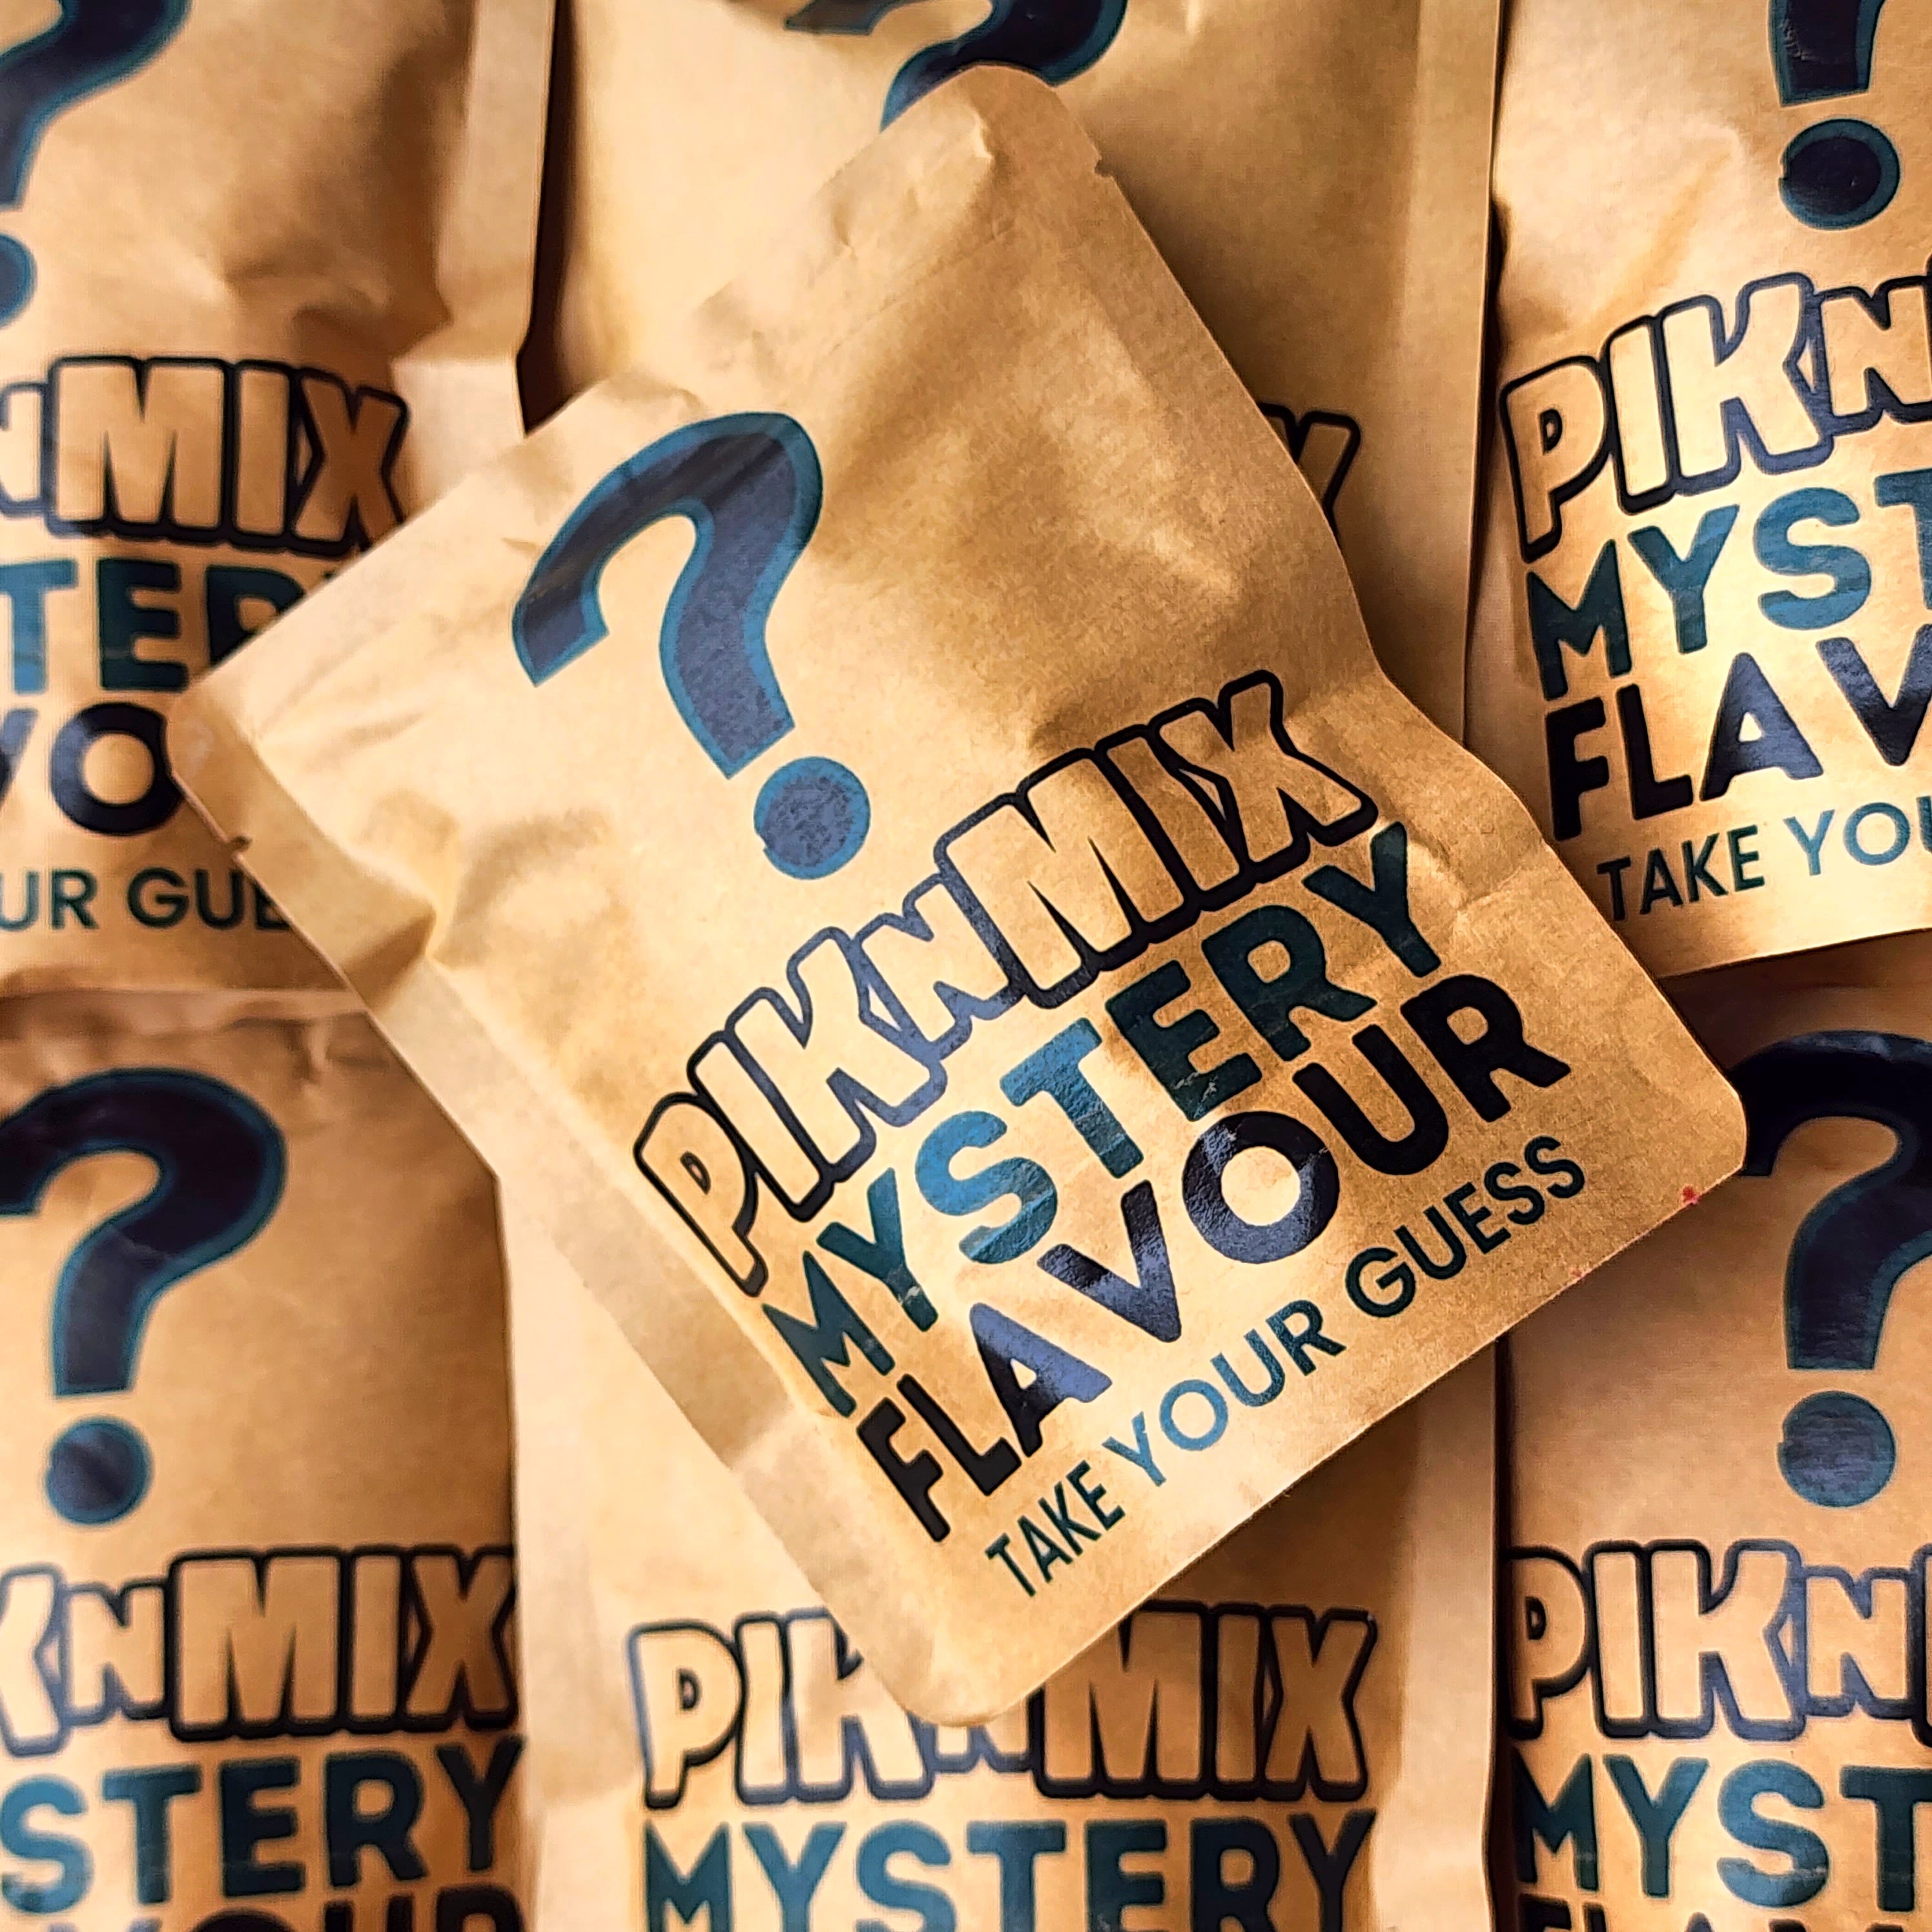 Mystery Flavour Cotton Candy - Pik n Mix Lollies NZ